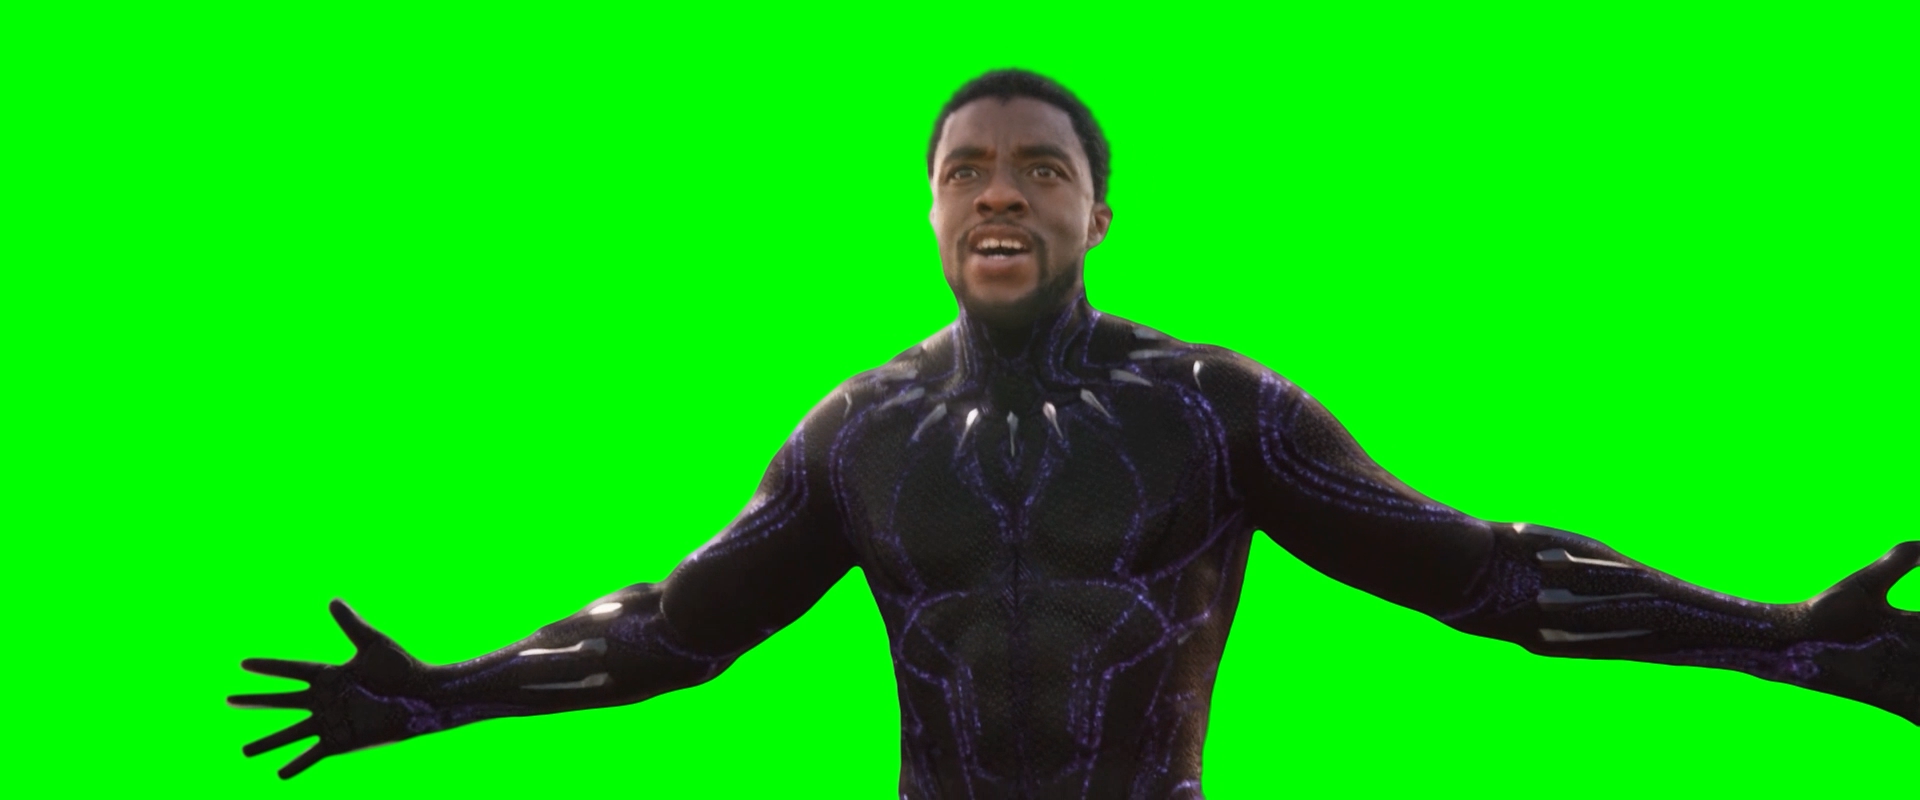 Black Panther - As you can see, I am not dead! (Green Screen)